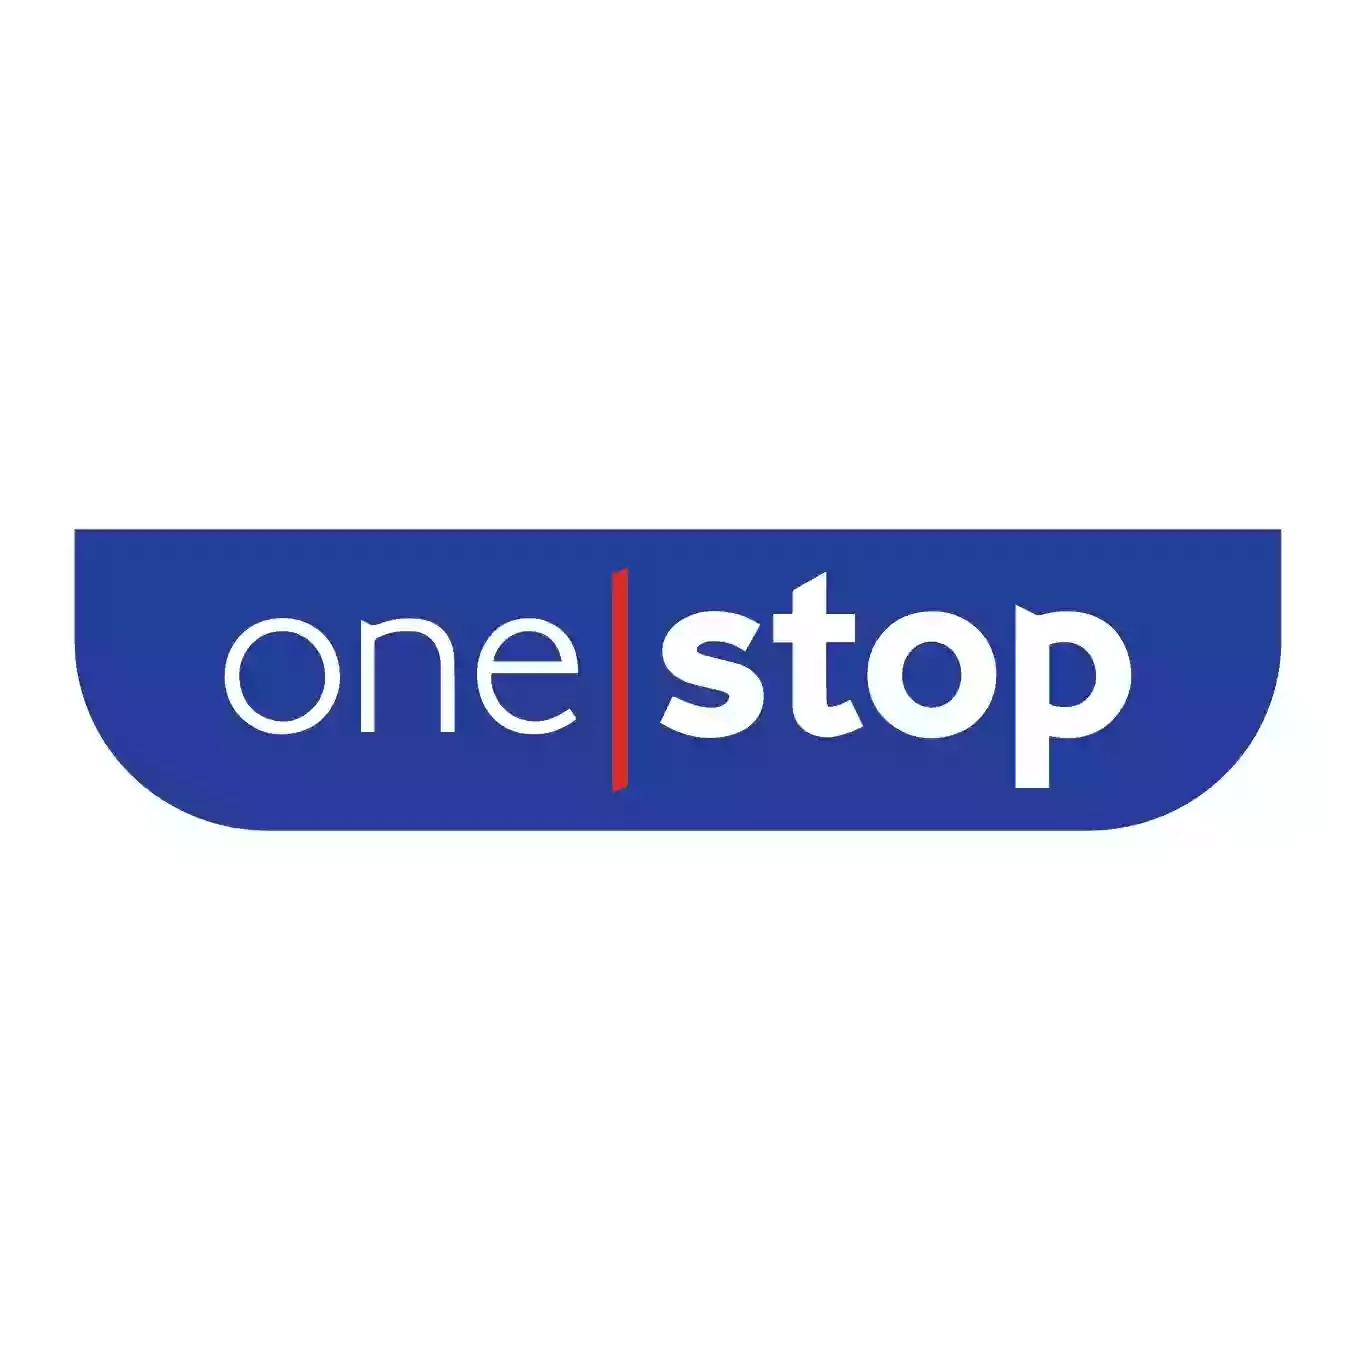 One Stop Etwall